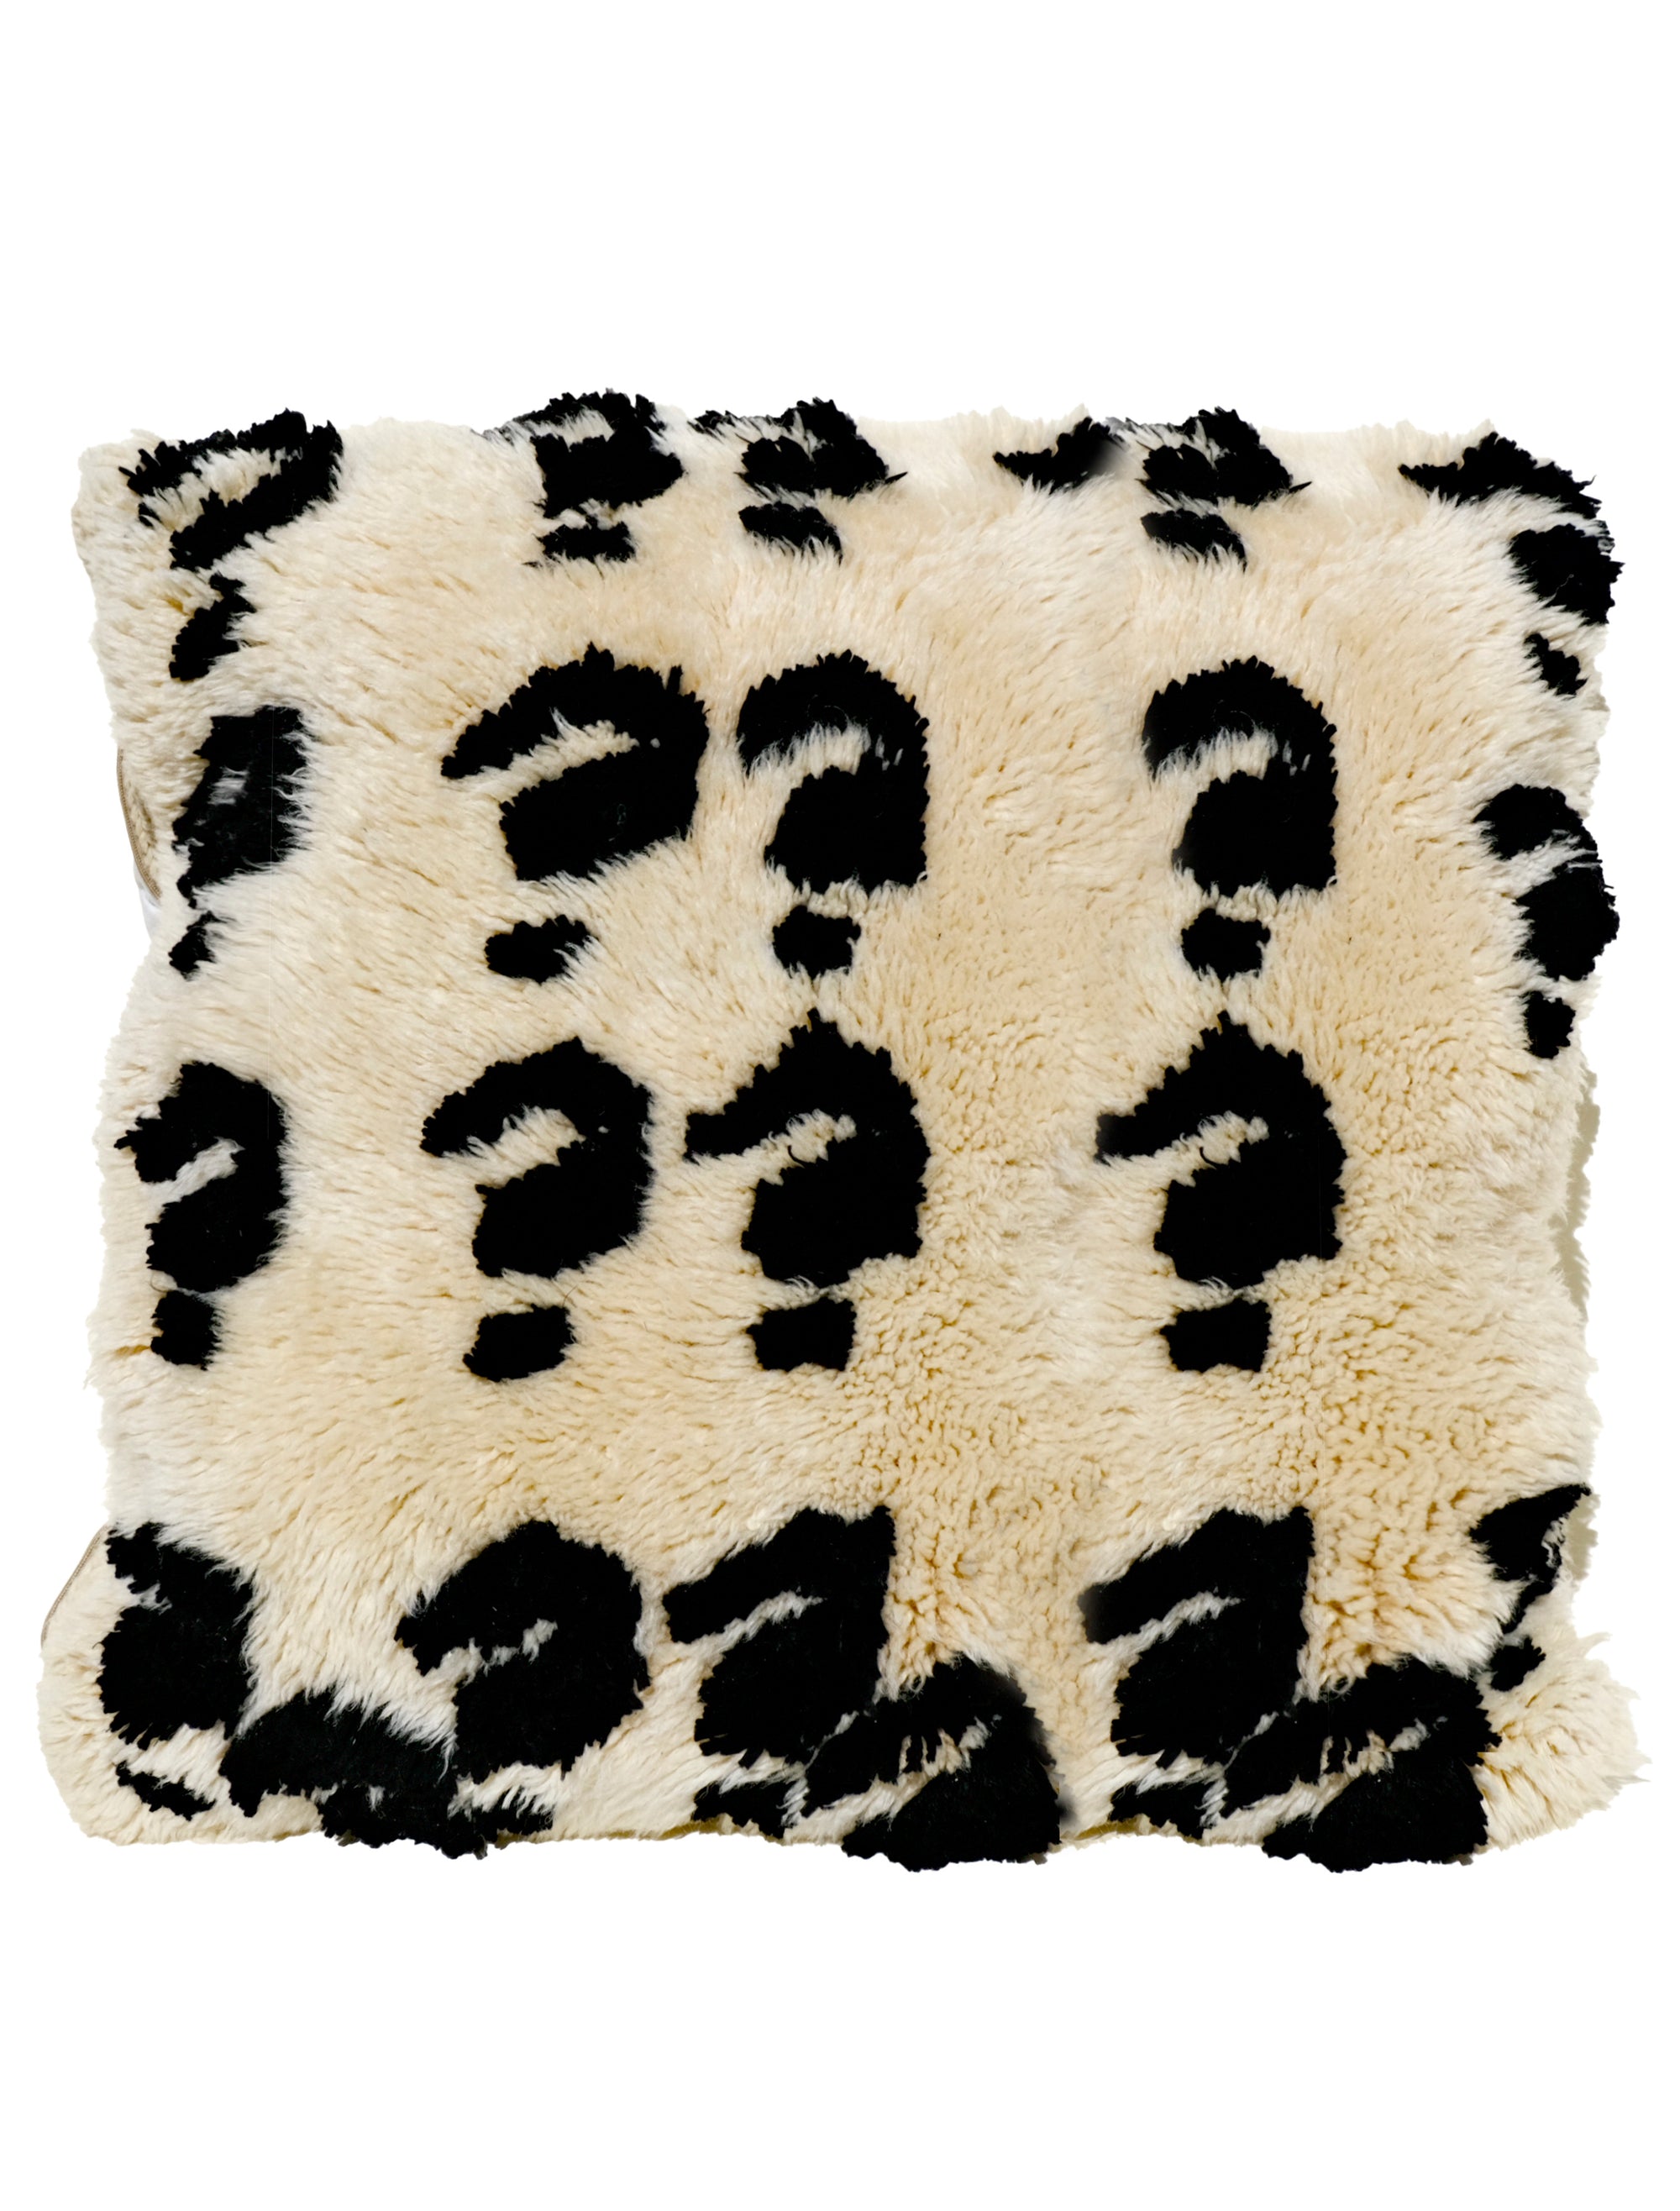 Introducing the "Question Marks" cushion – it's like a soft puzzle for your space! The ivory base is sprinkled with cute black question marks, making it fuzzy, soft, and a little bit quirky. Sized at 55x55cm, it's a cozy addition with a touch of playful elegance. Perfect for those who like their décor with a hint of curiosity